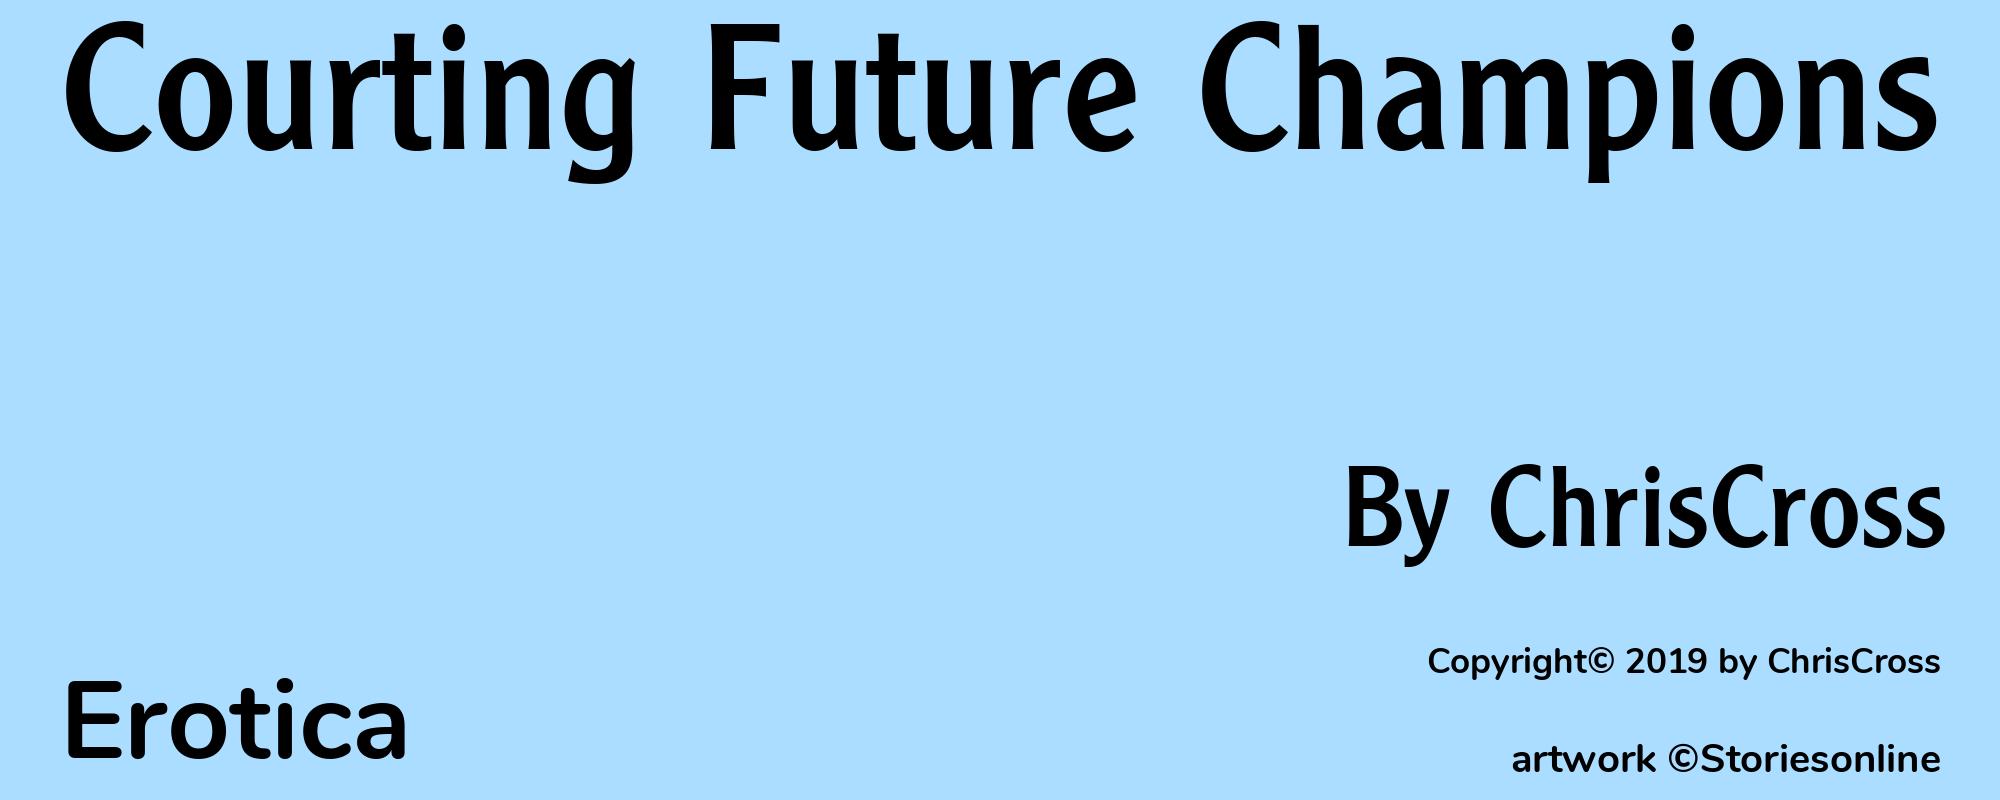 Courting Future Champions - Cover